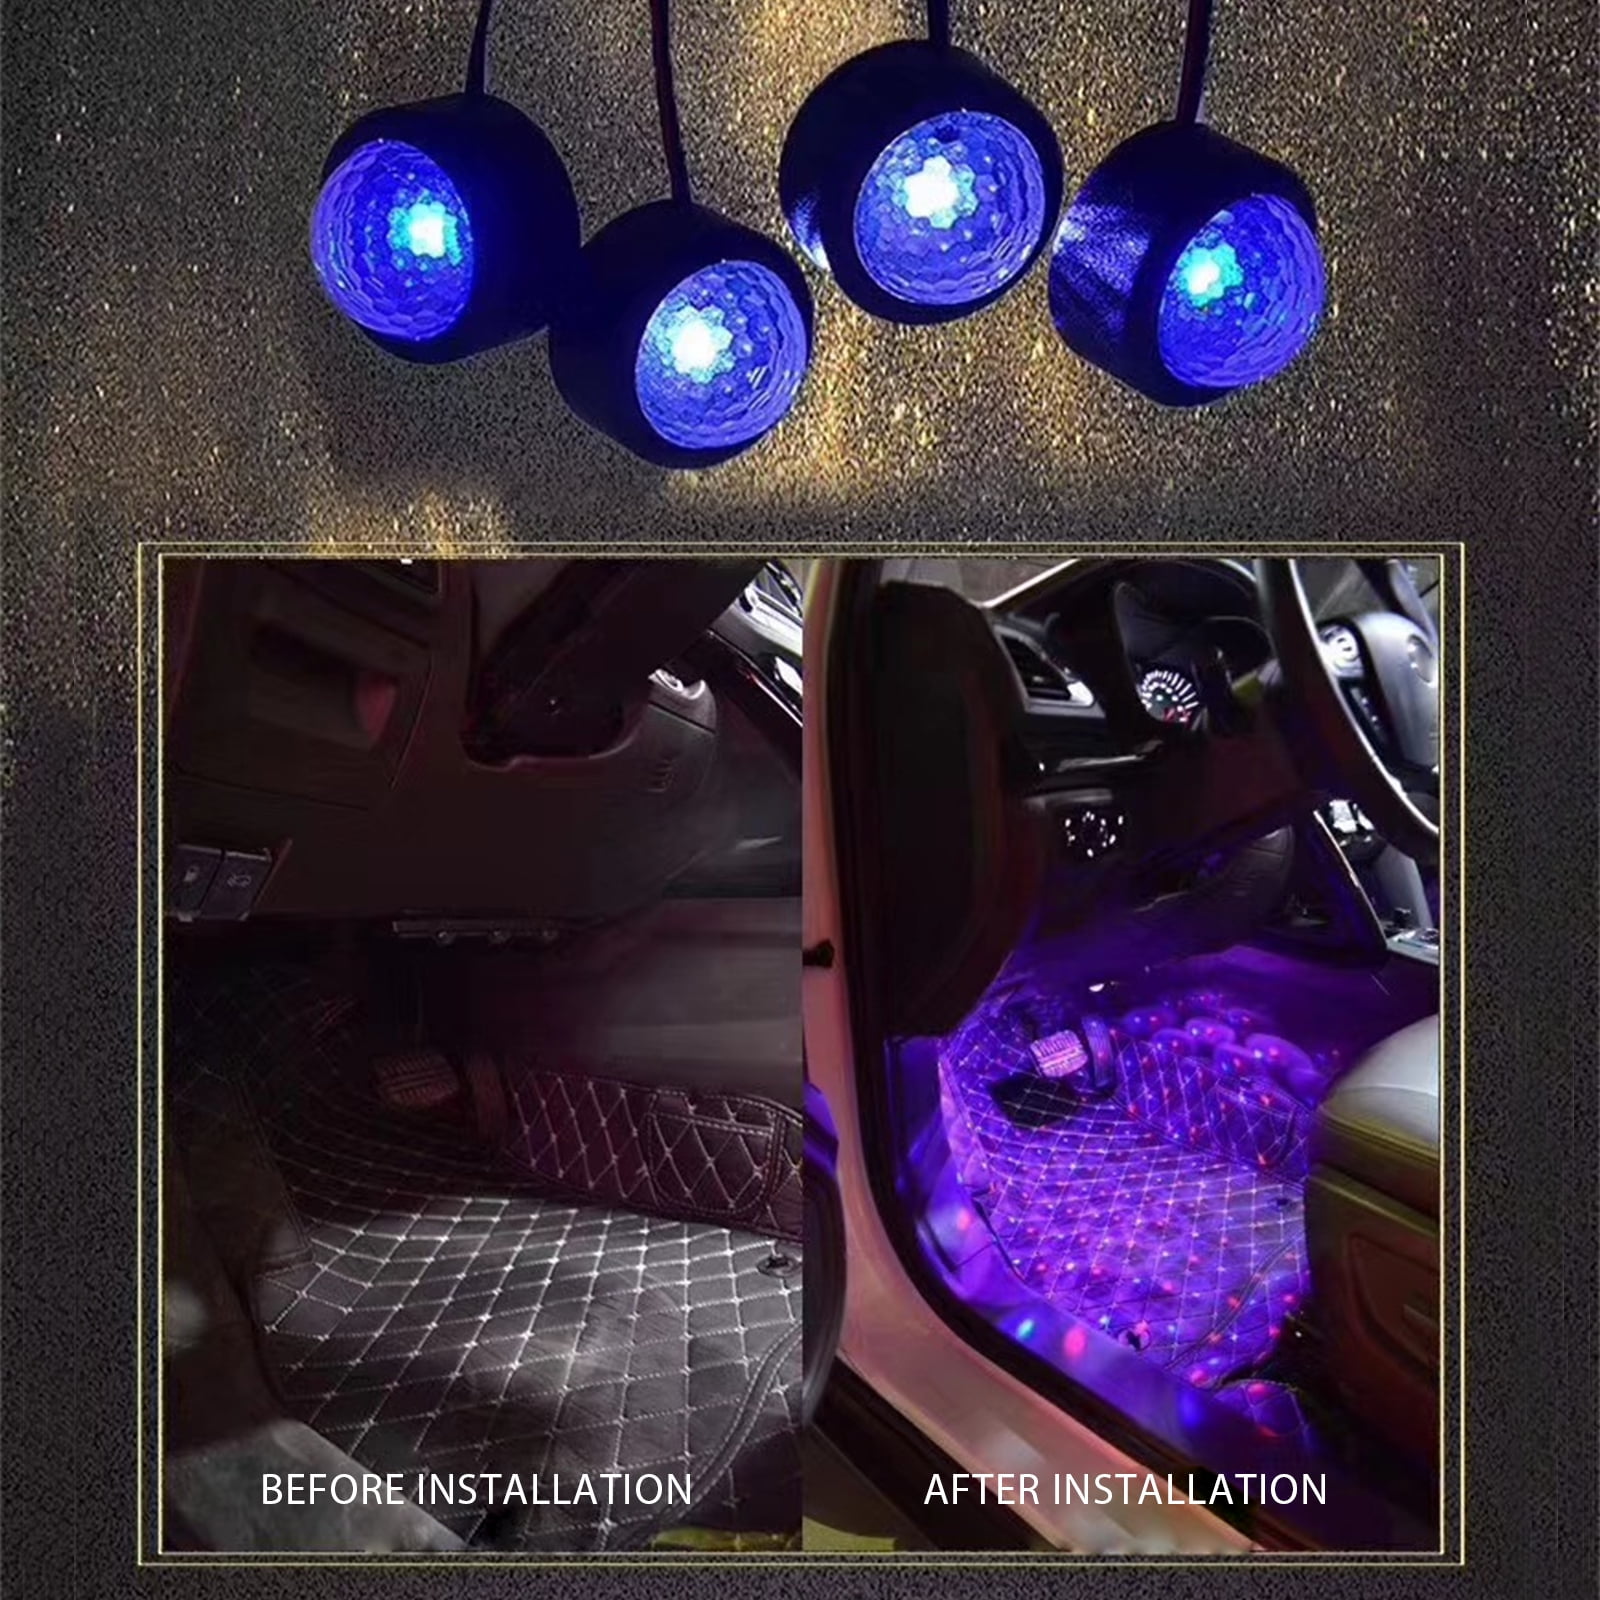 Details about   USB Car Atmosphere Lamp Interior Ambient Star Light Projector LED new X0D2 